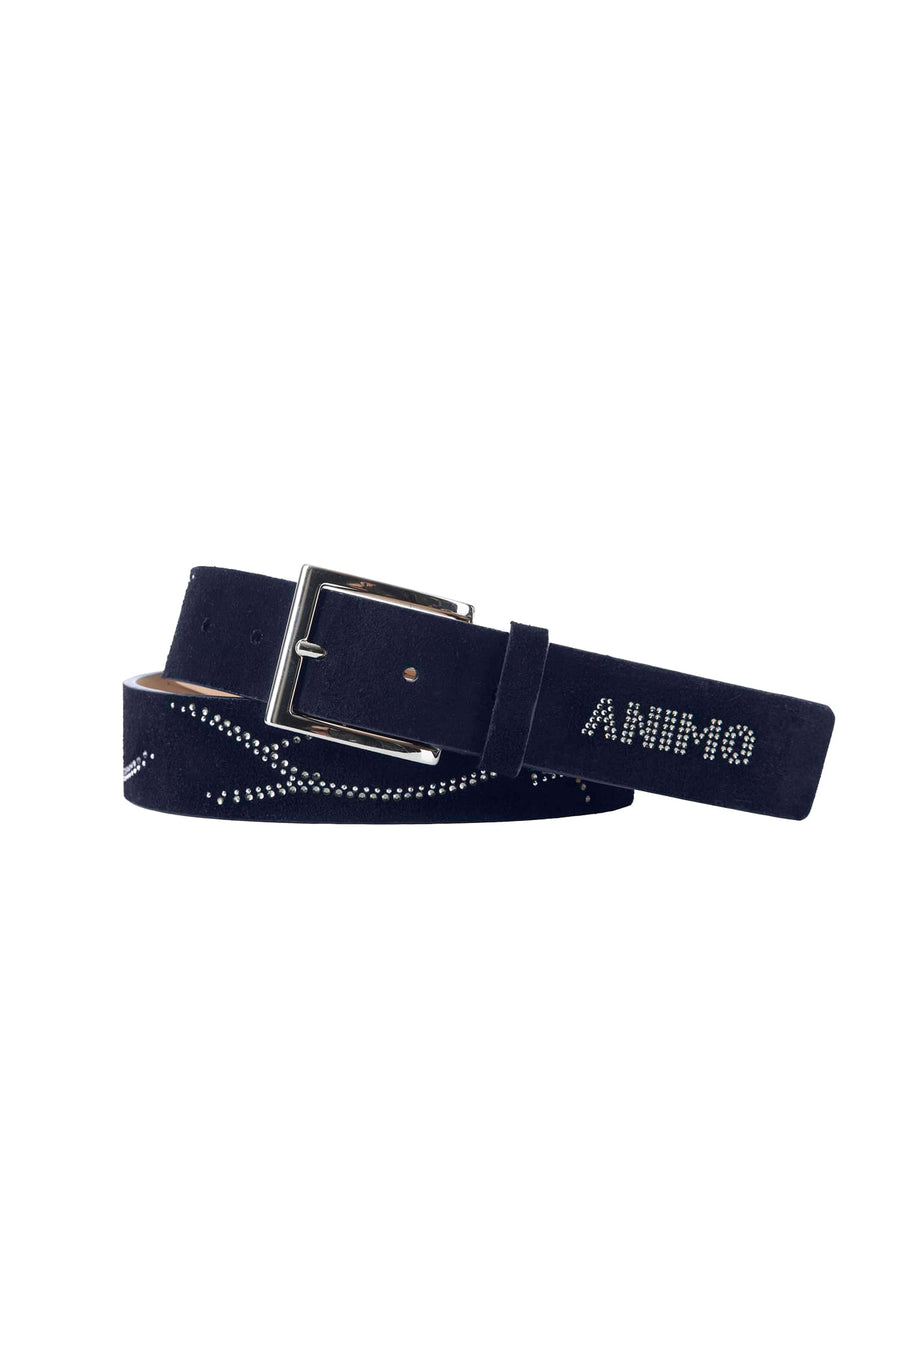 Black Belt with Rhinestone detailing throughout and Rhinestone ANIMO lettering.